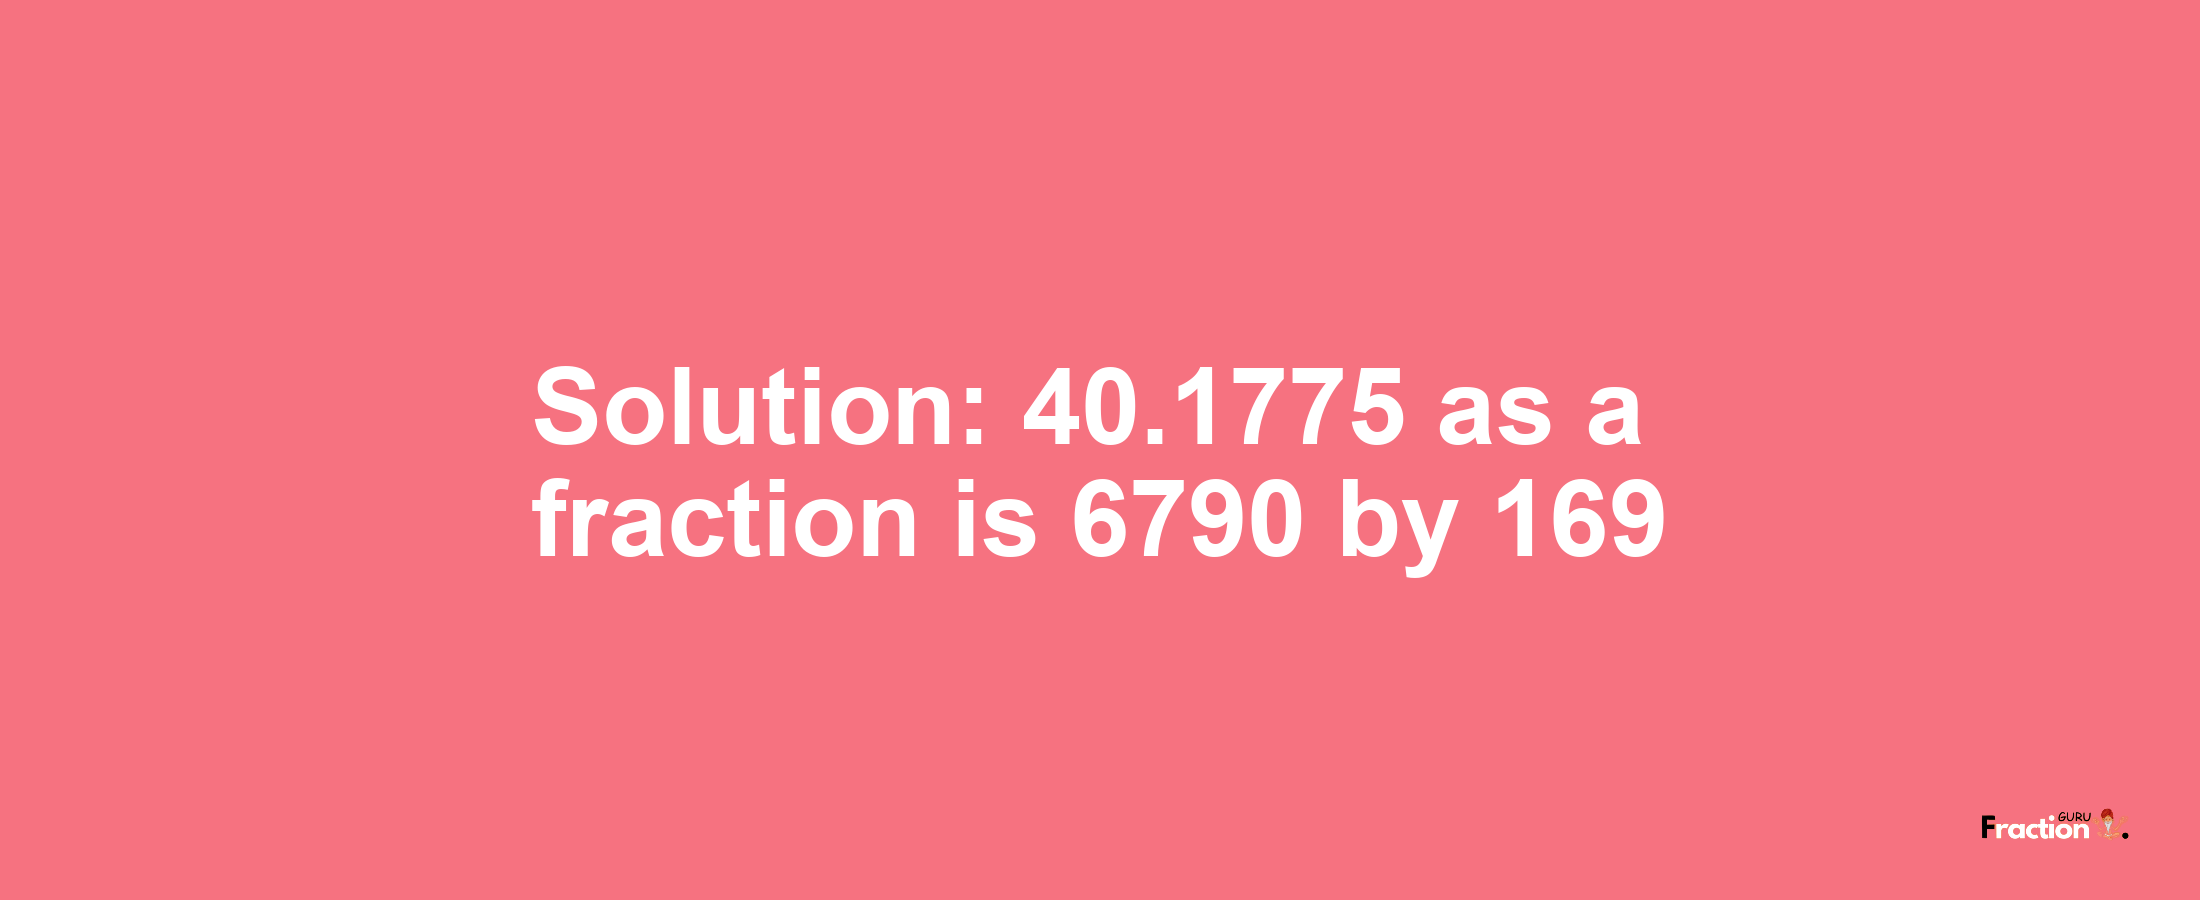 Solution:40.1775 as a fraction is 6790/169